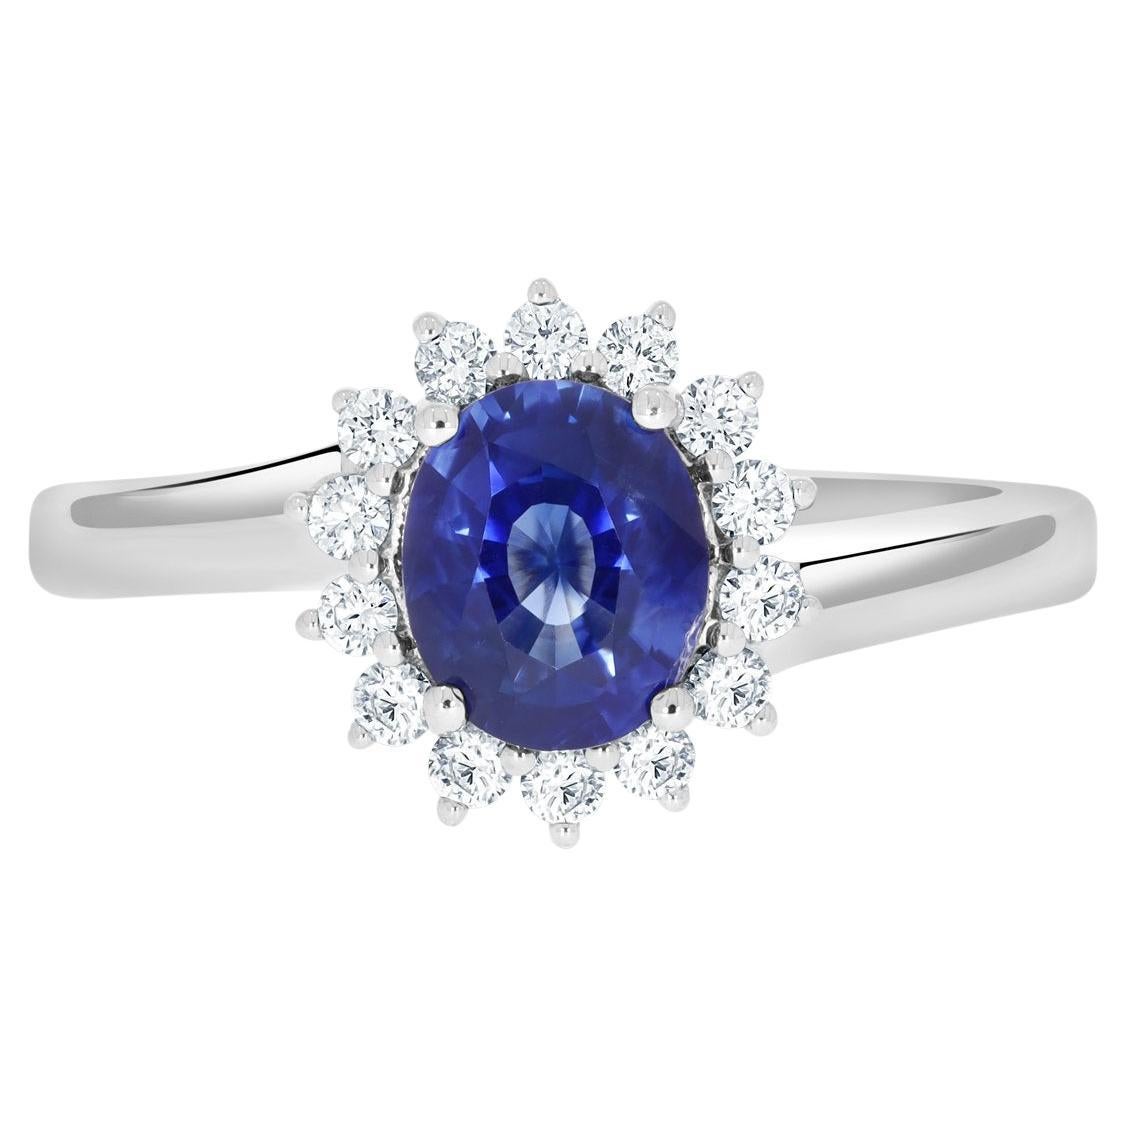 1.16ct Sapphire Ring with 0.23Tct Diamonds Set in 14K White Gold